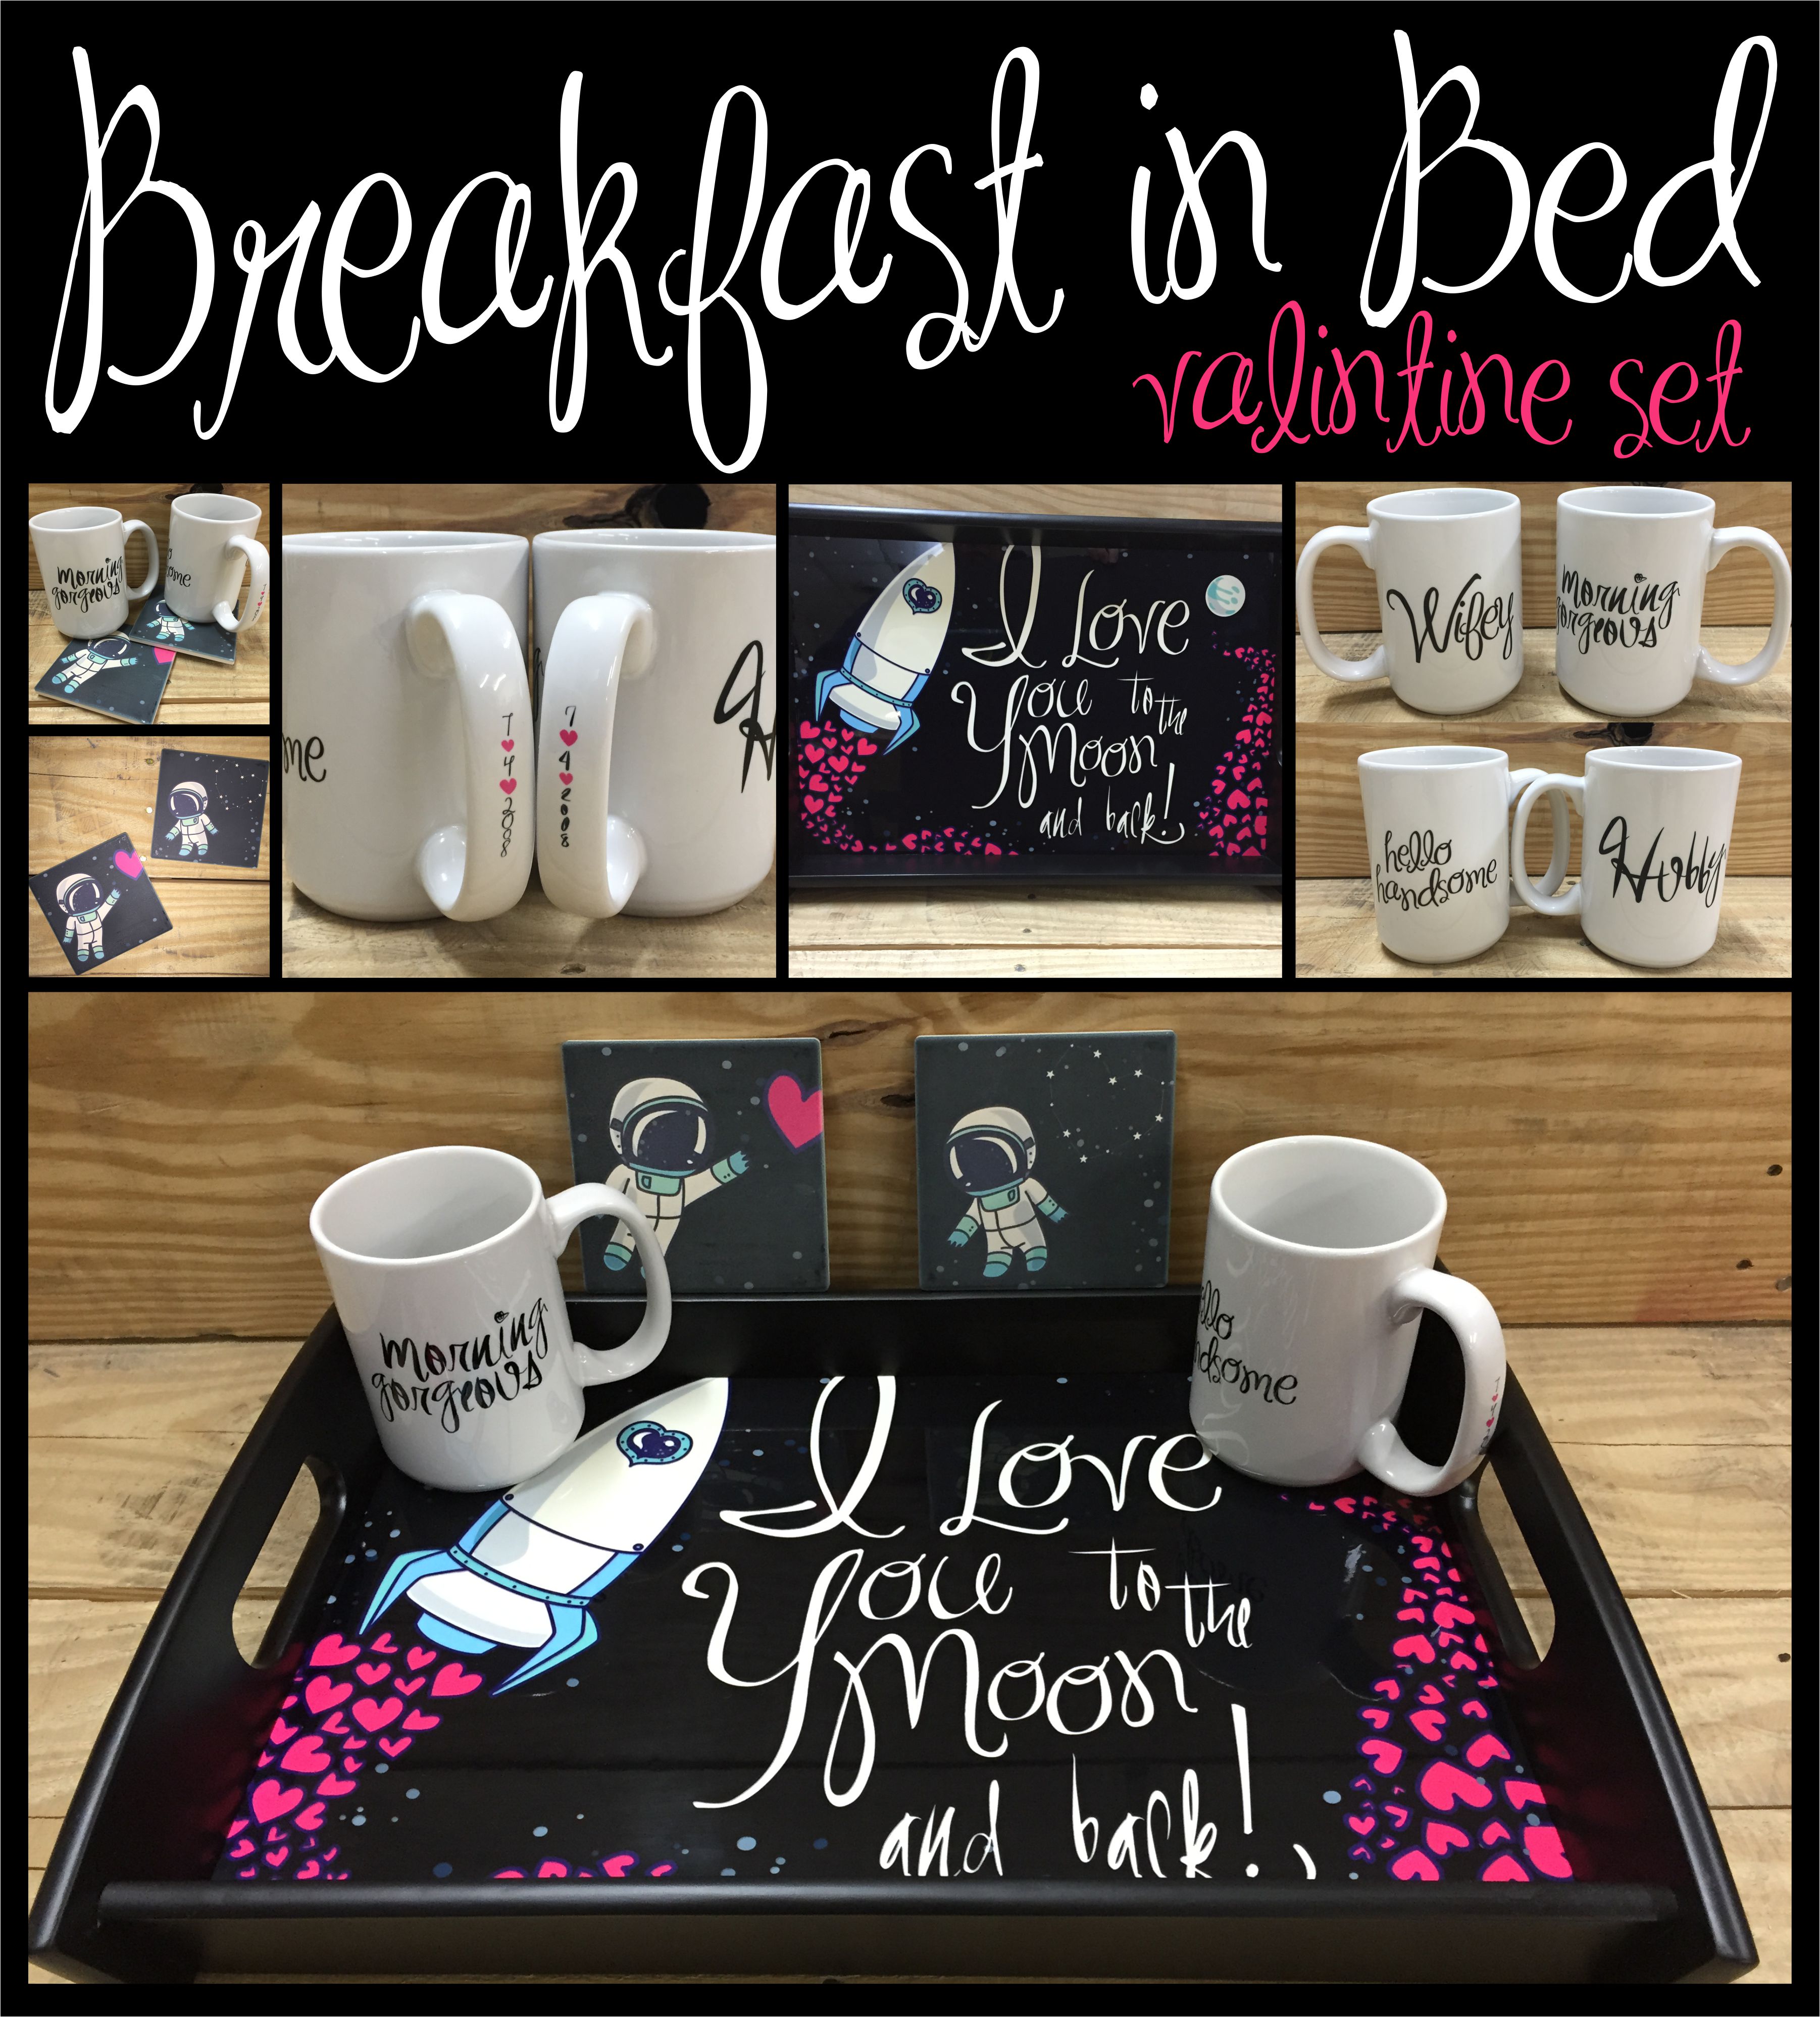 Breakfast In Bed made with sublimation printing